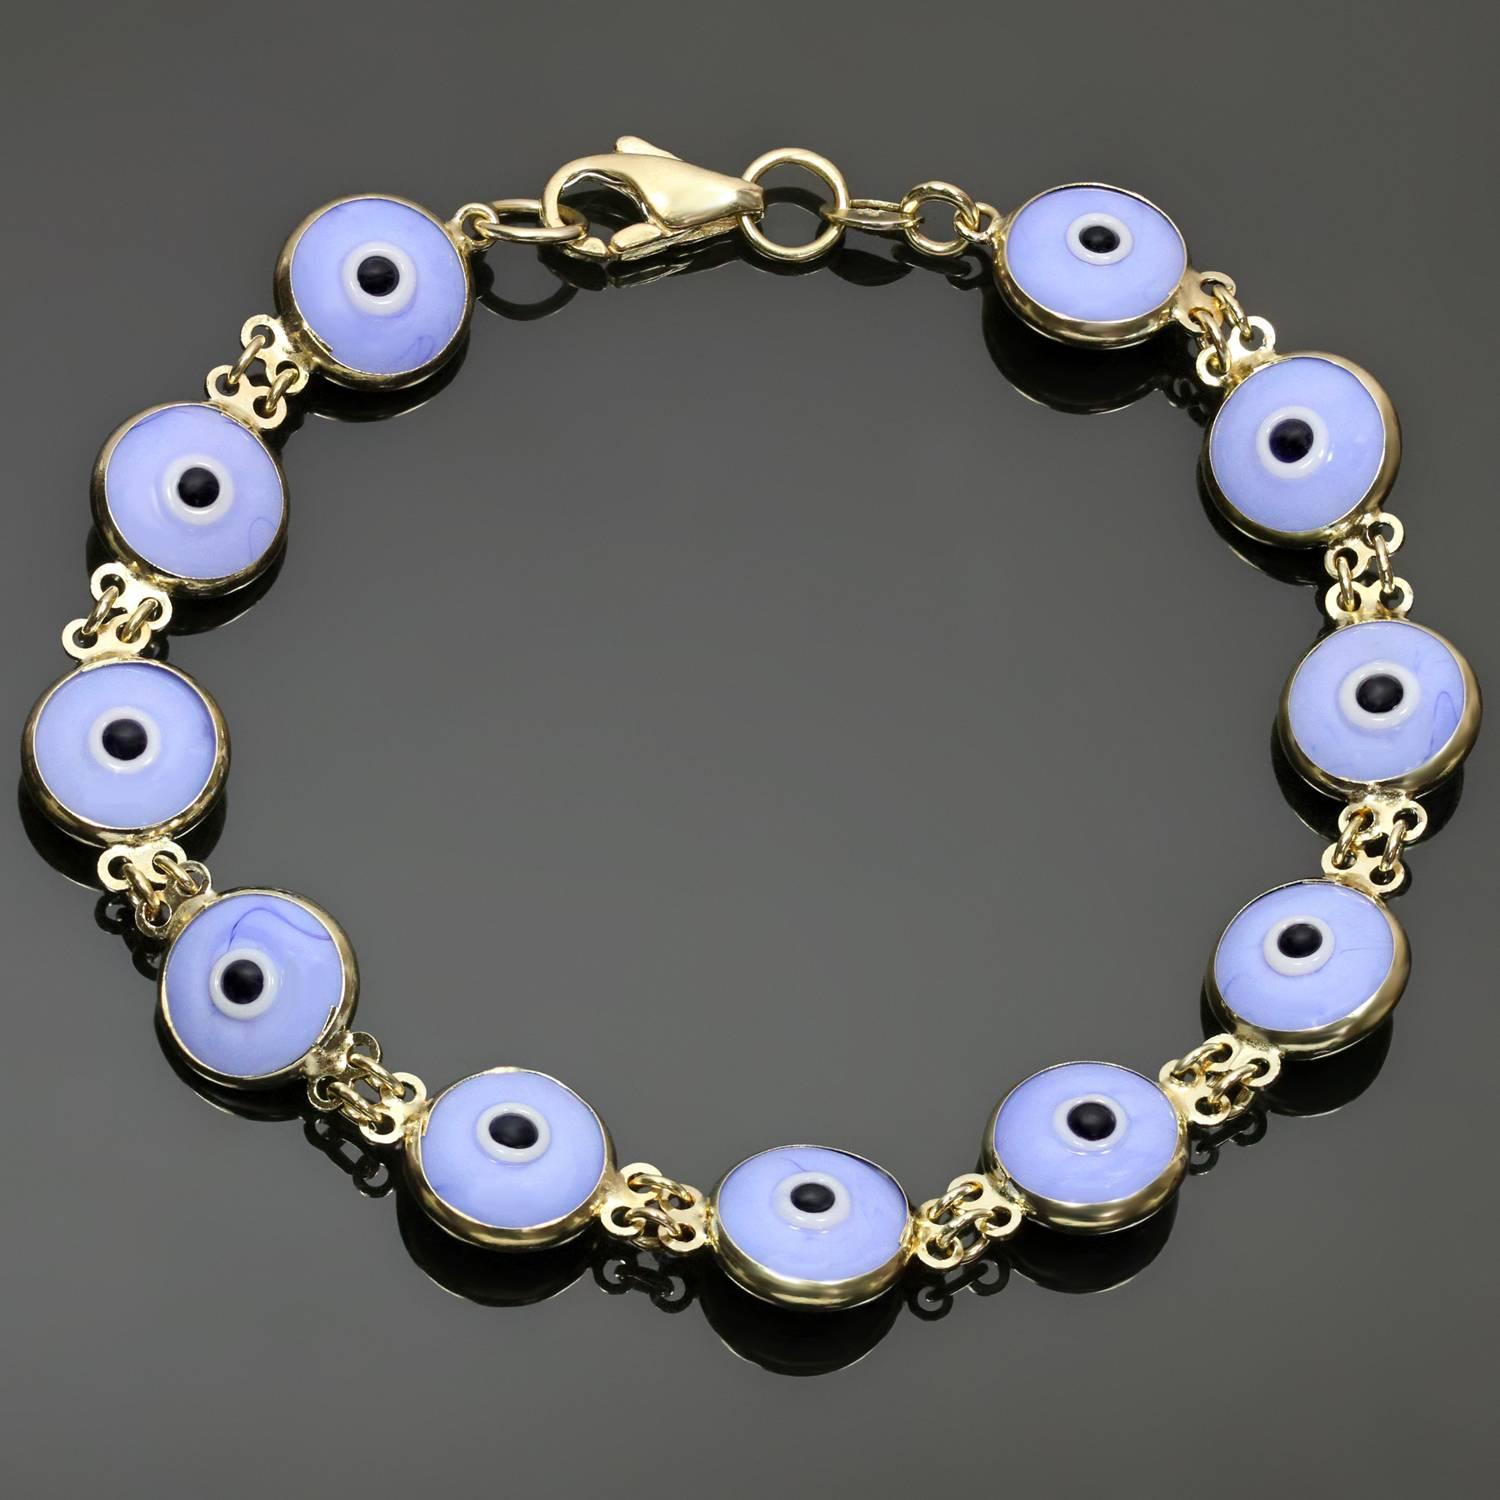 This classic good luck link bracelet features 11 round double-sided evil eyes crafted in enamel and 14k yellow gold. Made in United States. Measurements: 0.38